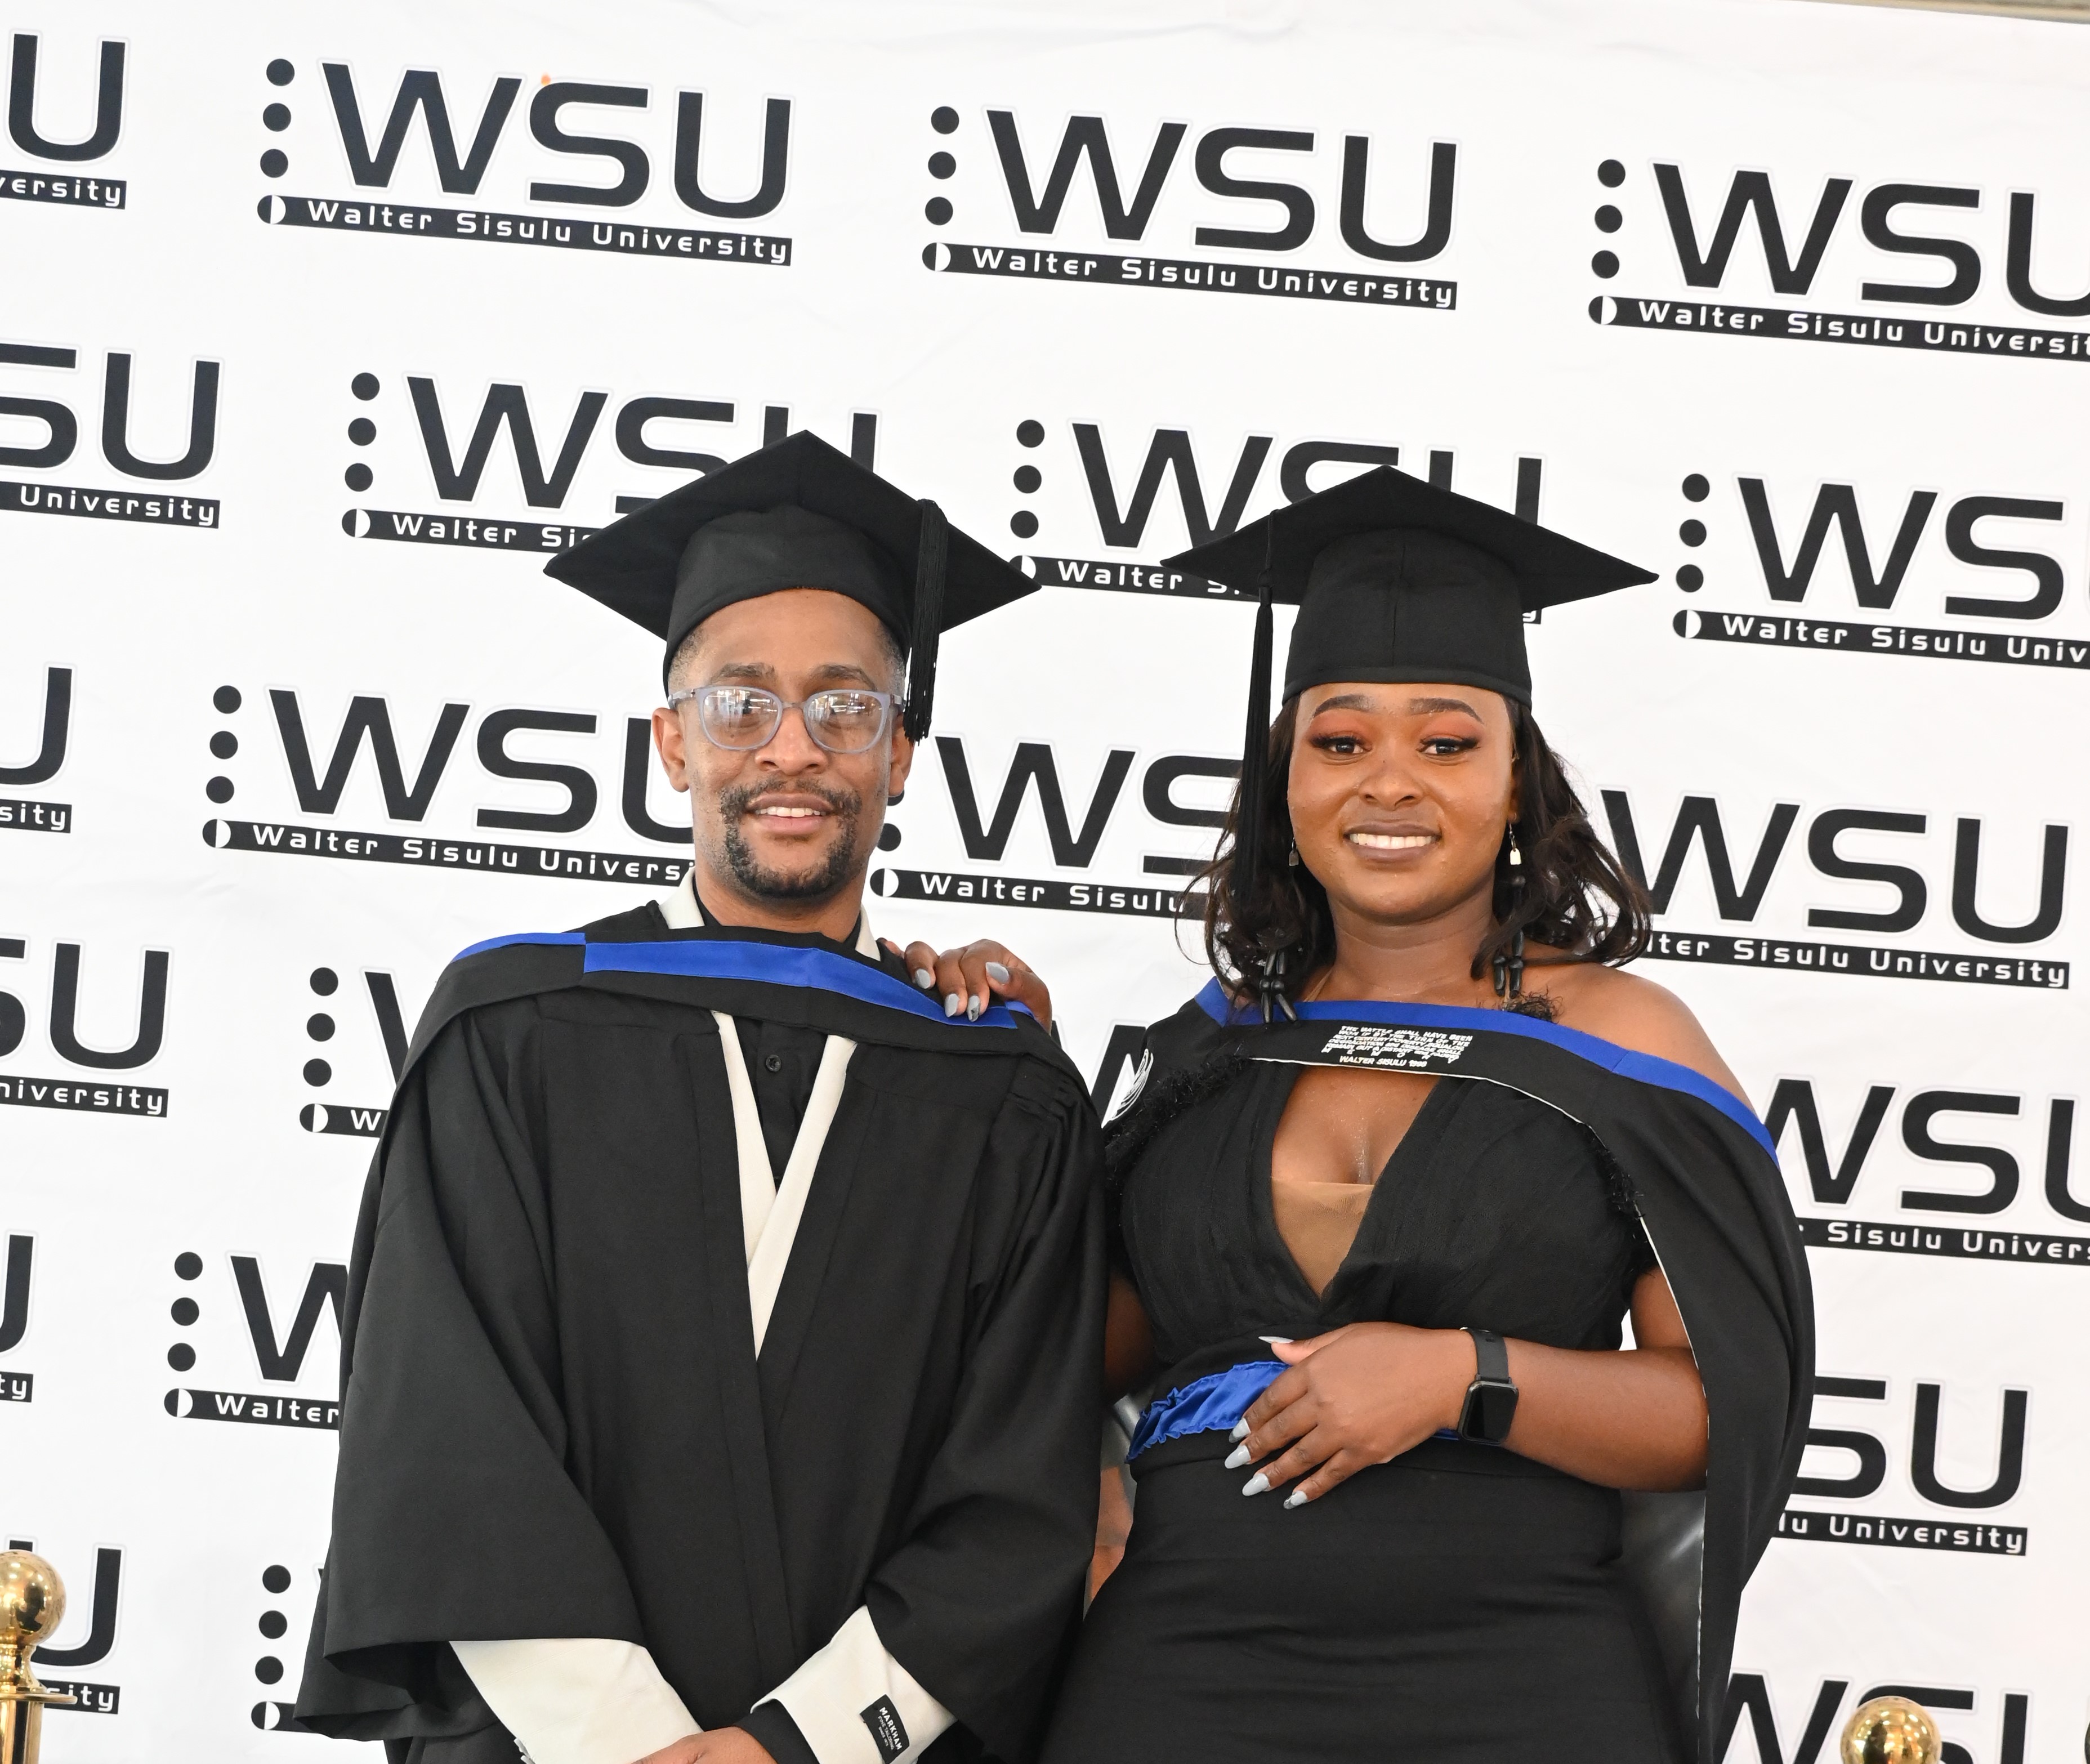 MEDIA INDUSTRY PROTEGES OBTAIN QUALIFICATIONS IN PR AND JOURNALISM AT BUTTERWRTH GRADUATION 